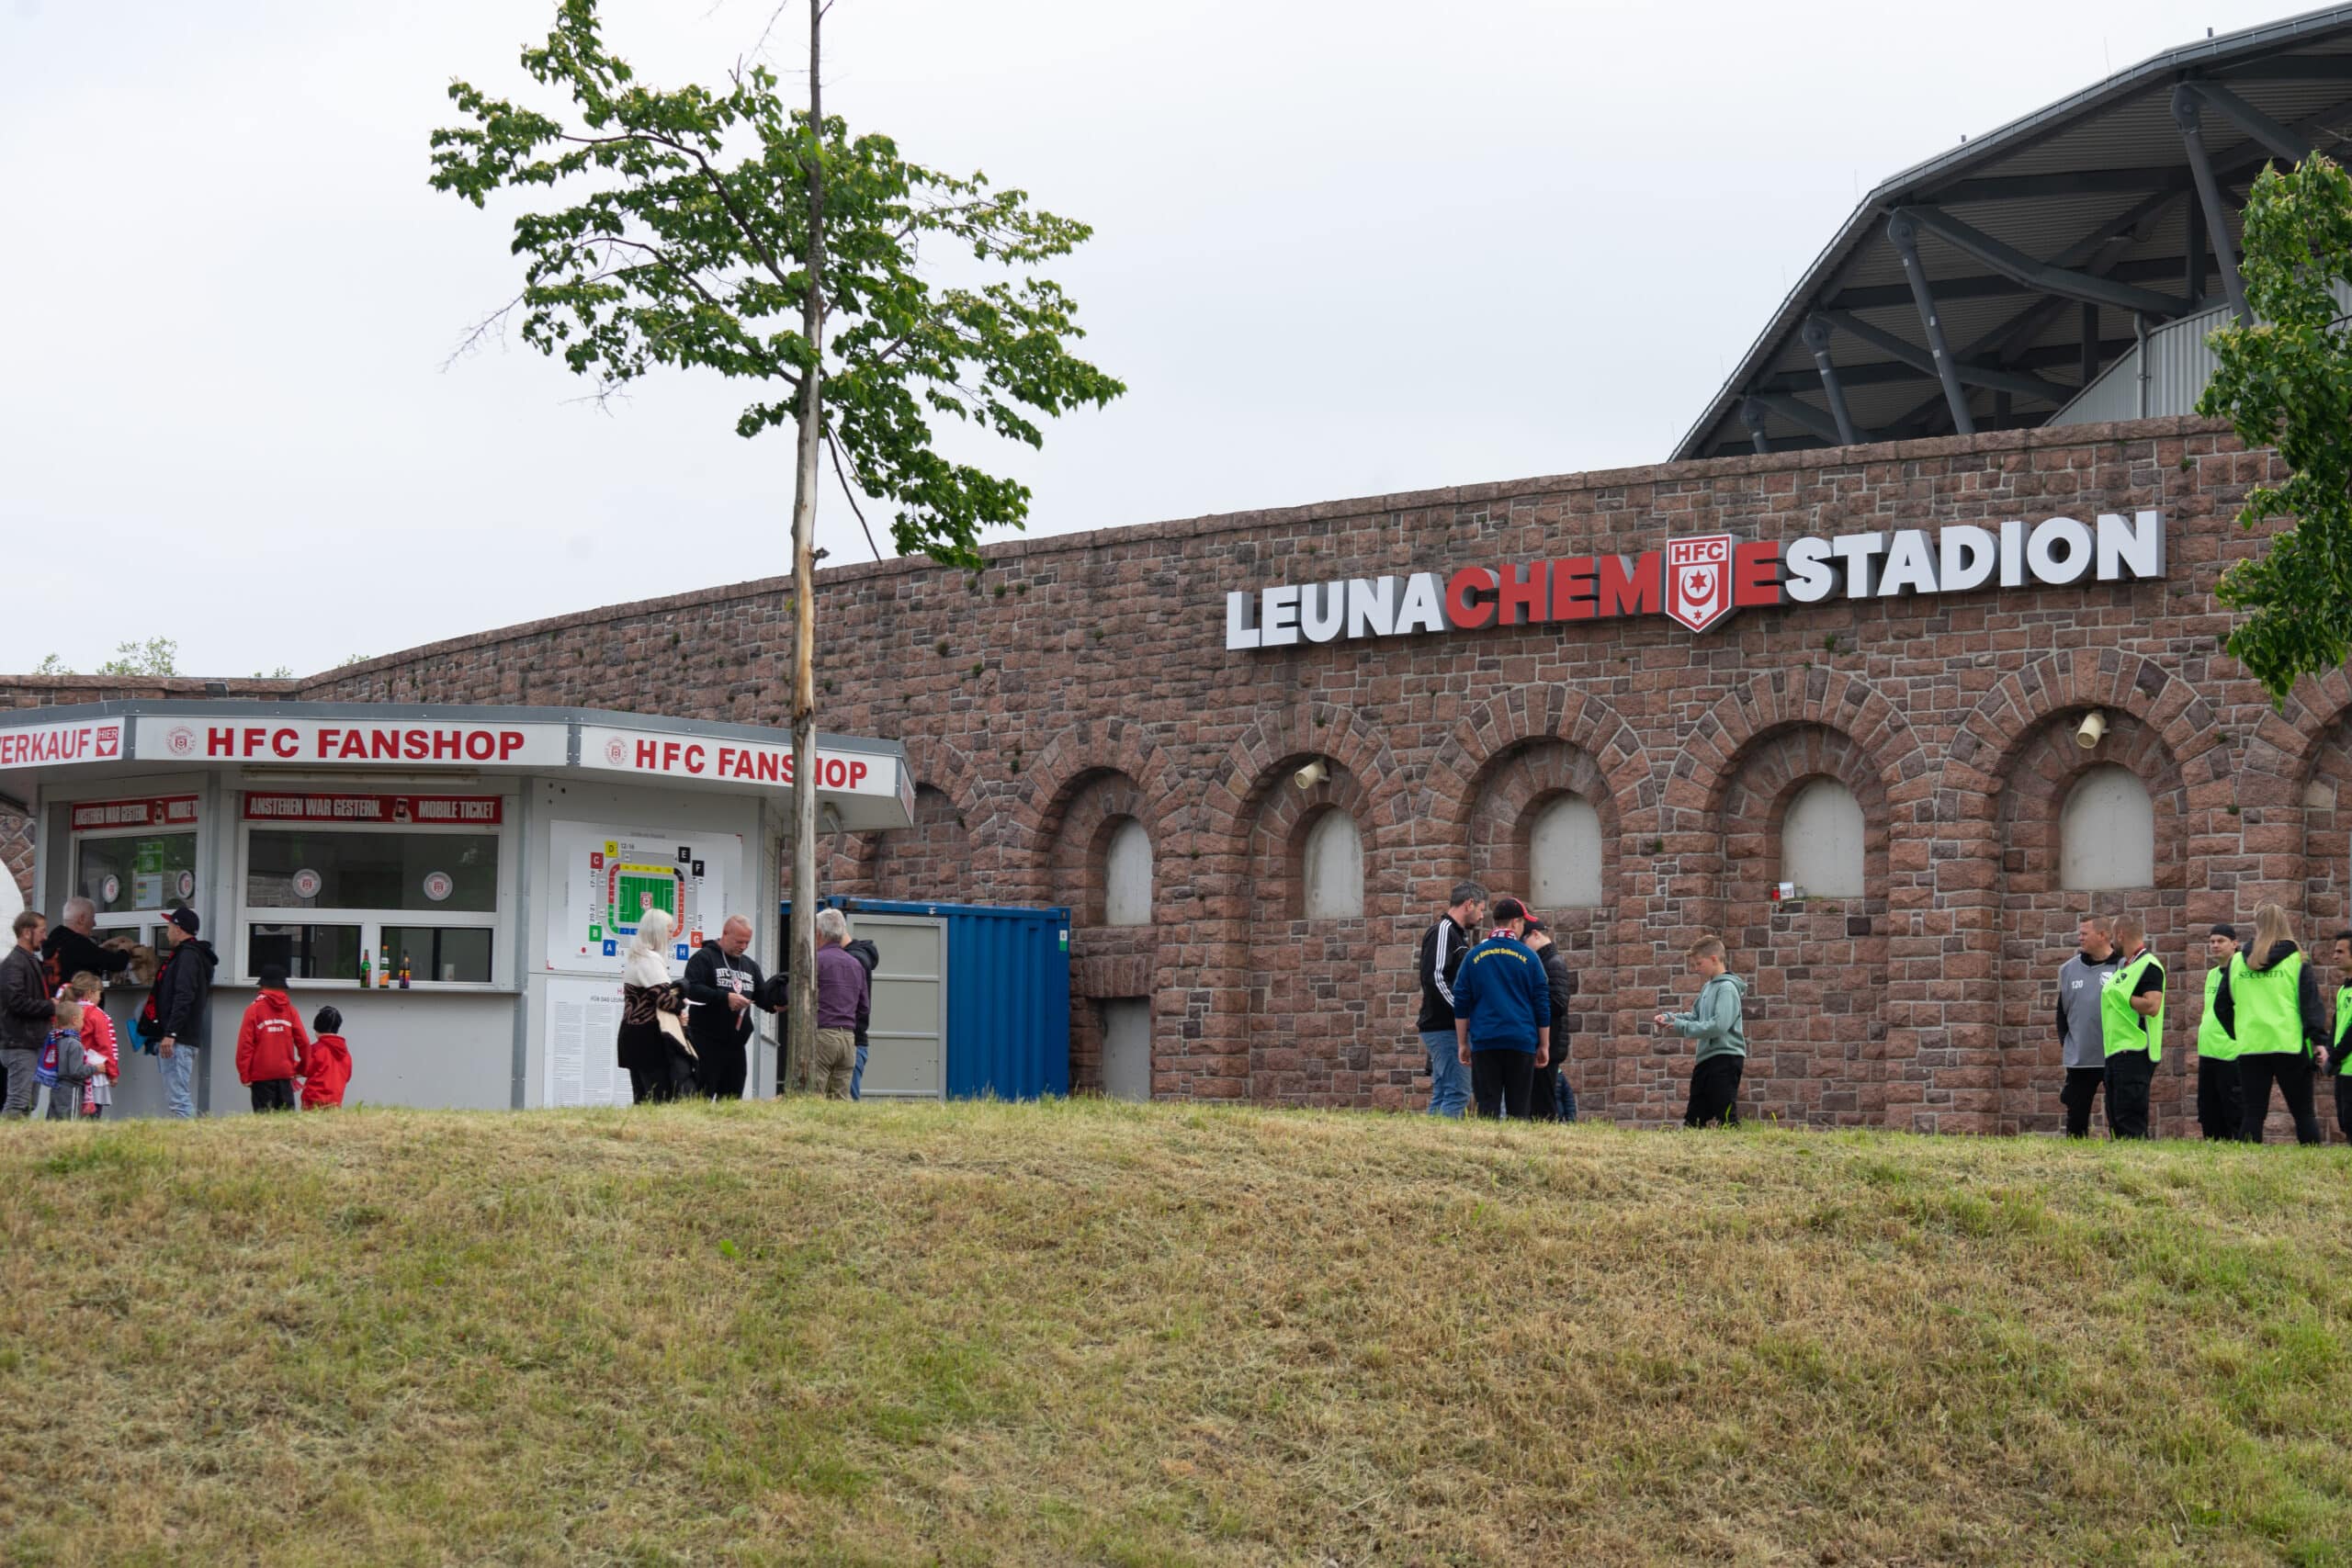 Exterior view of Leuna Chemie Stadium with historical wall of the old stadium